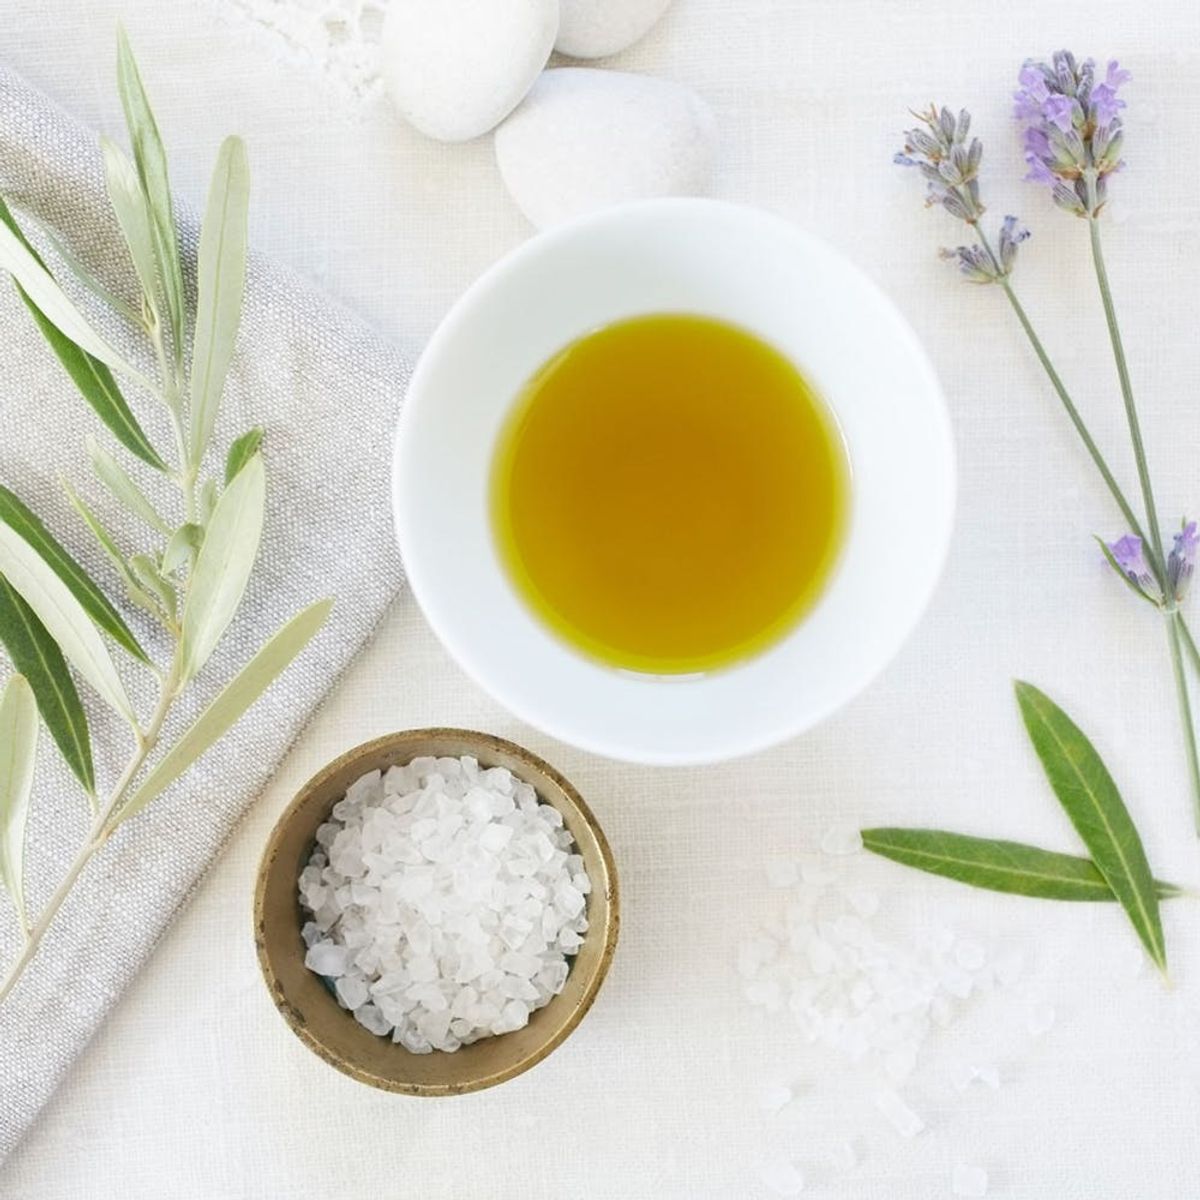 5 Essential Oils That Can Help Cure Your Worst Cold Symptoms